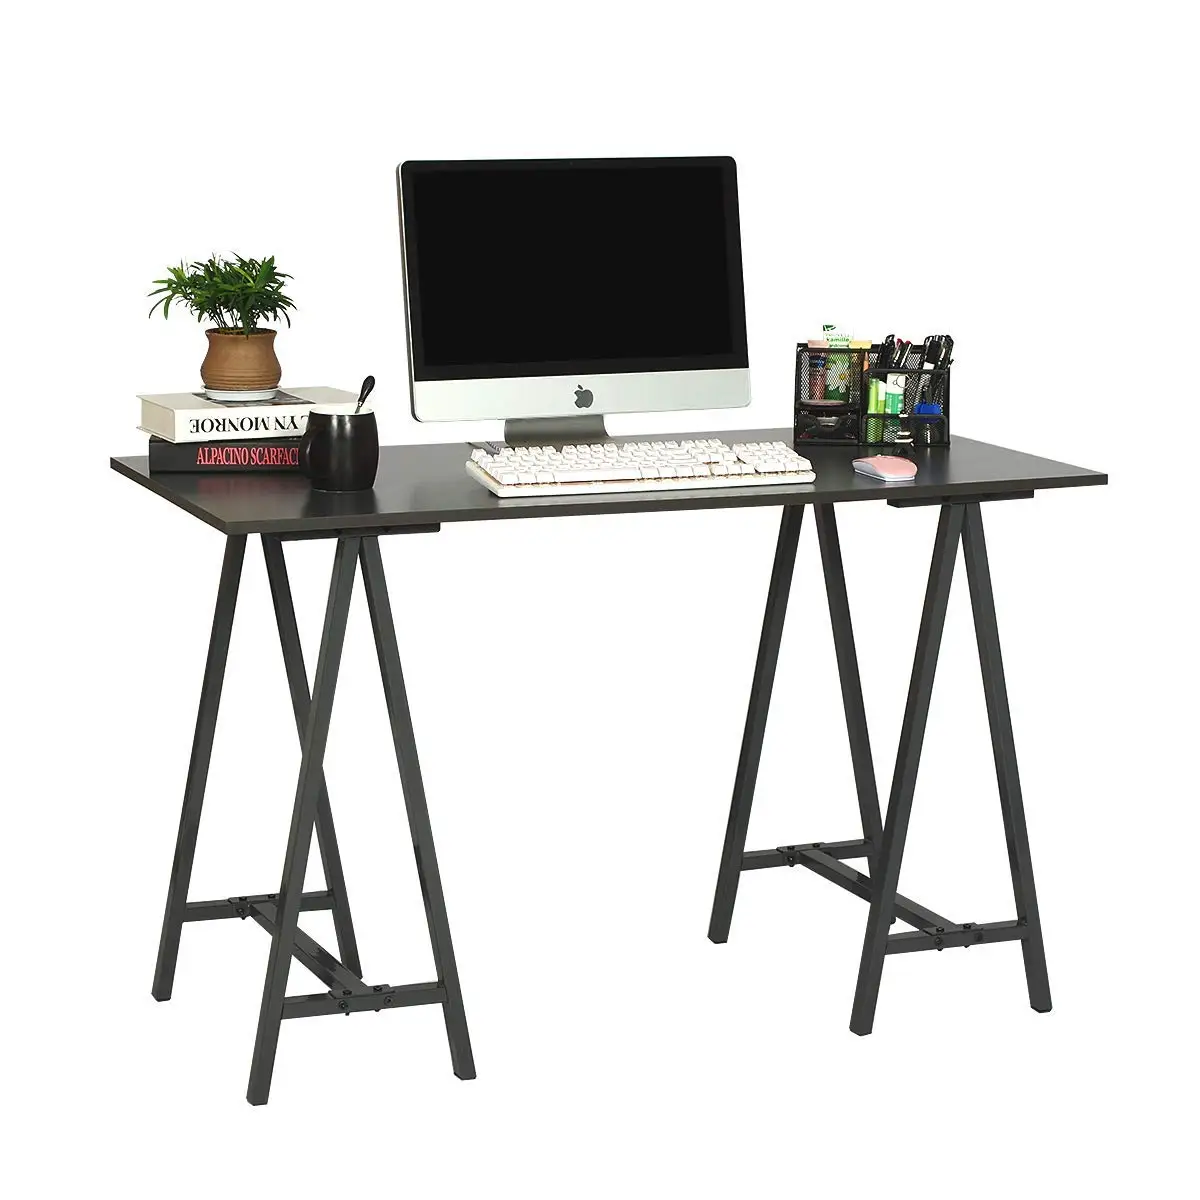 2018 Gaming Computer Writing Study Desk For Home Office Buy